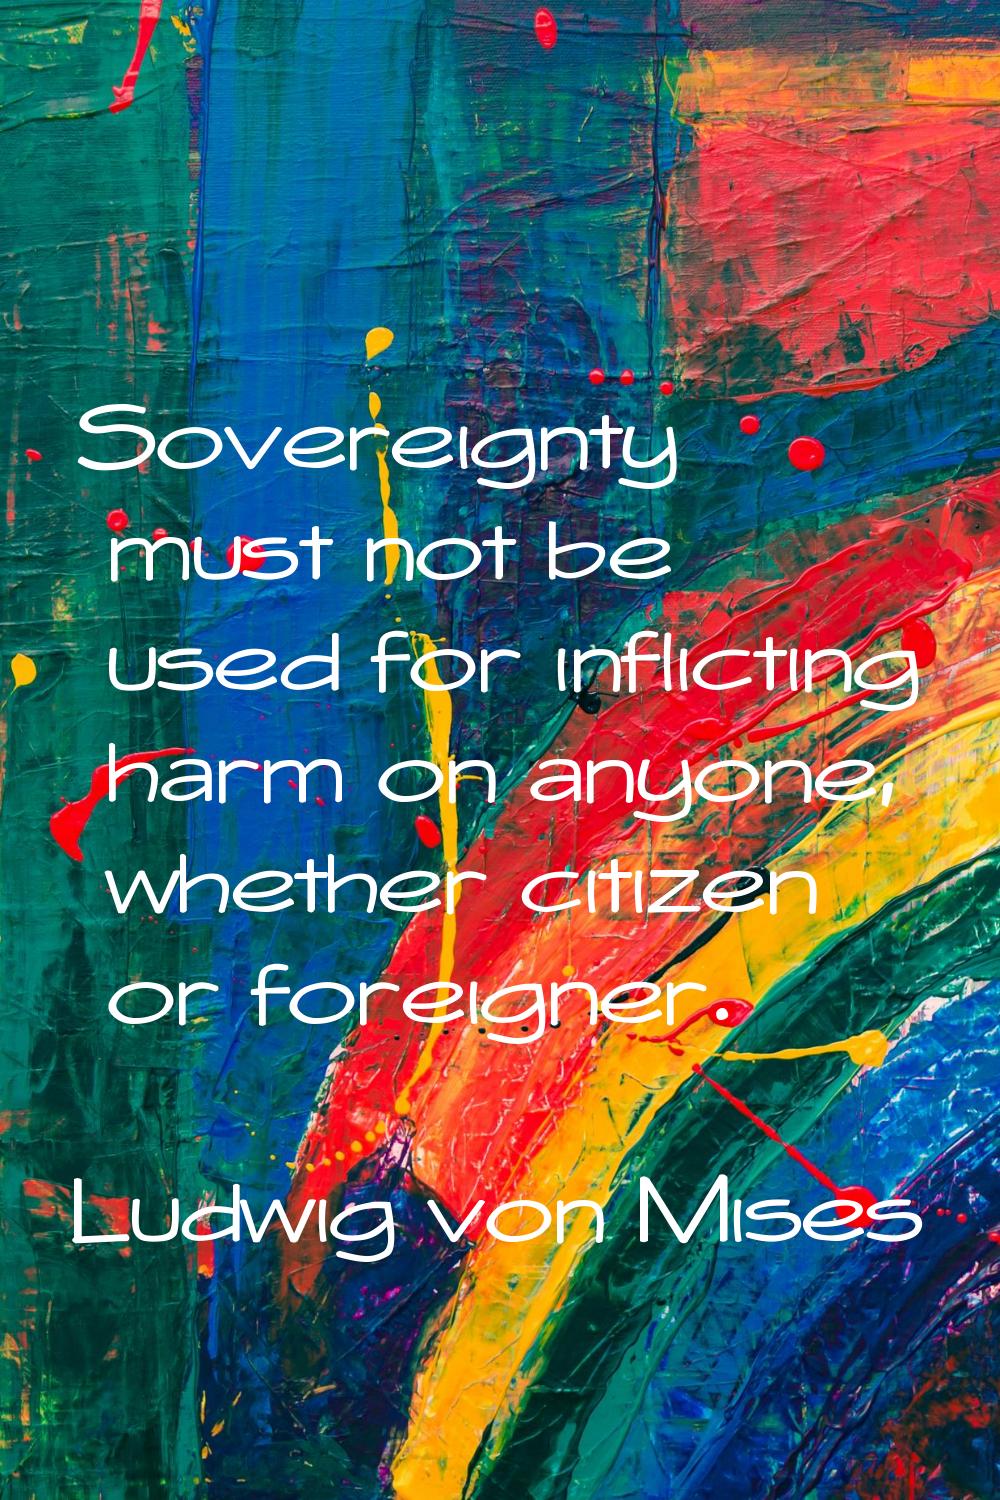 Sovereignty must not be used for inflicting harm on anyone, whether citizen or foreigner.